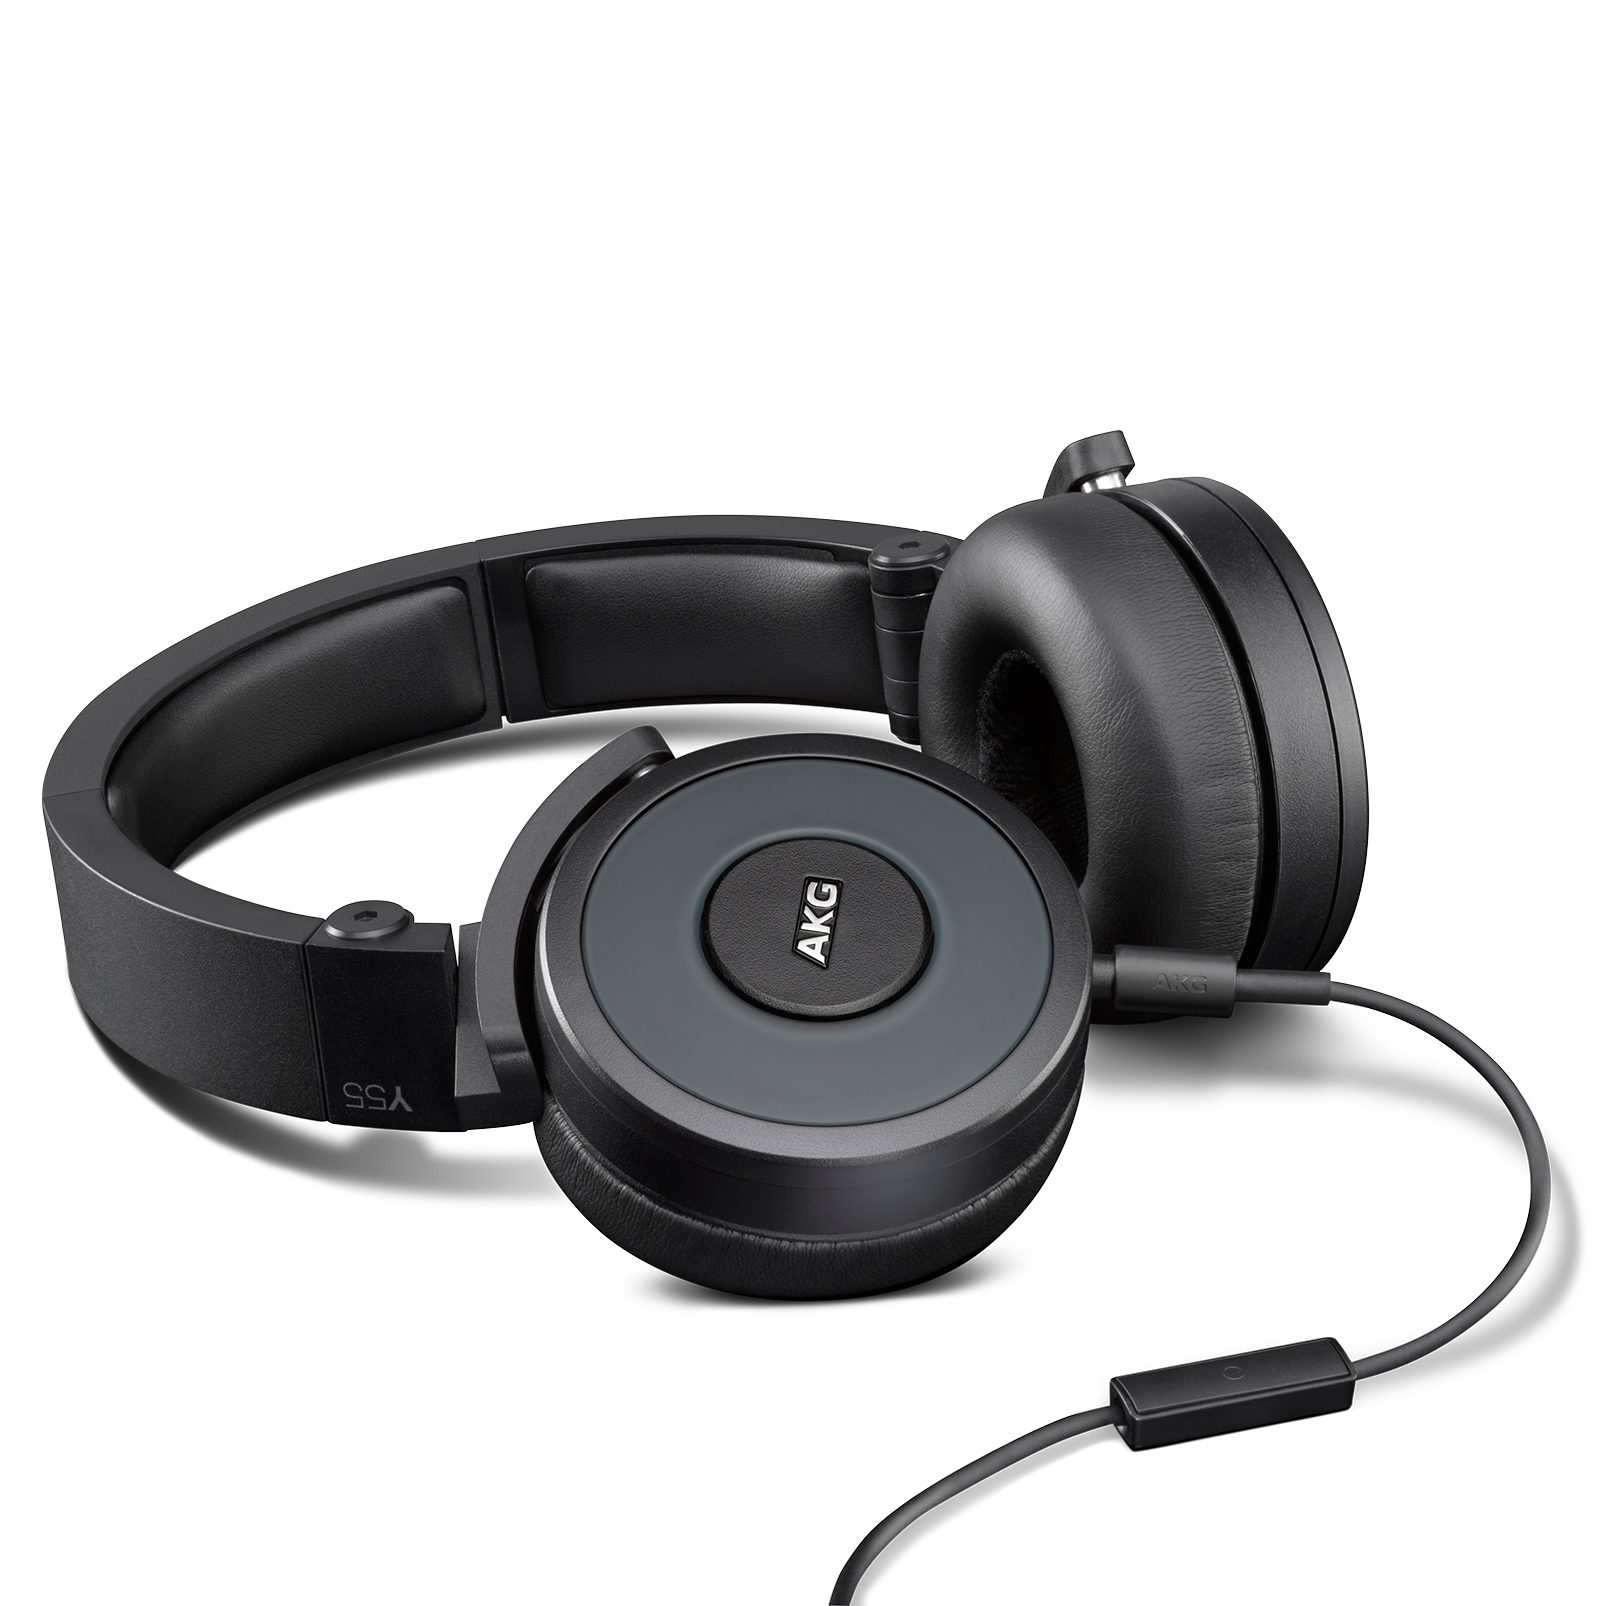 Y55 - Black - High-performance DJ headphones with in-line microphone and remote - Detailshot 1